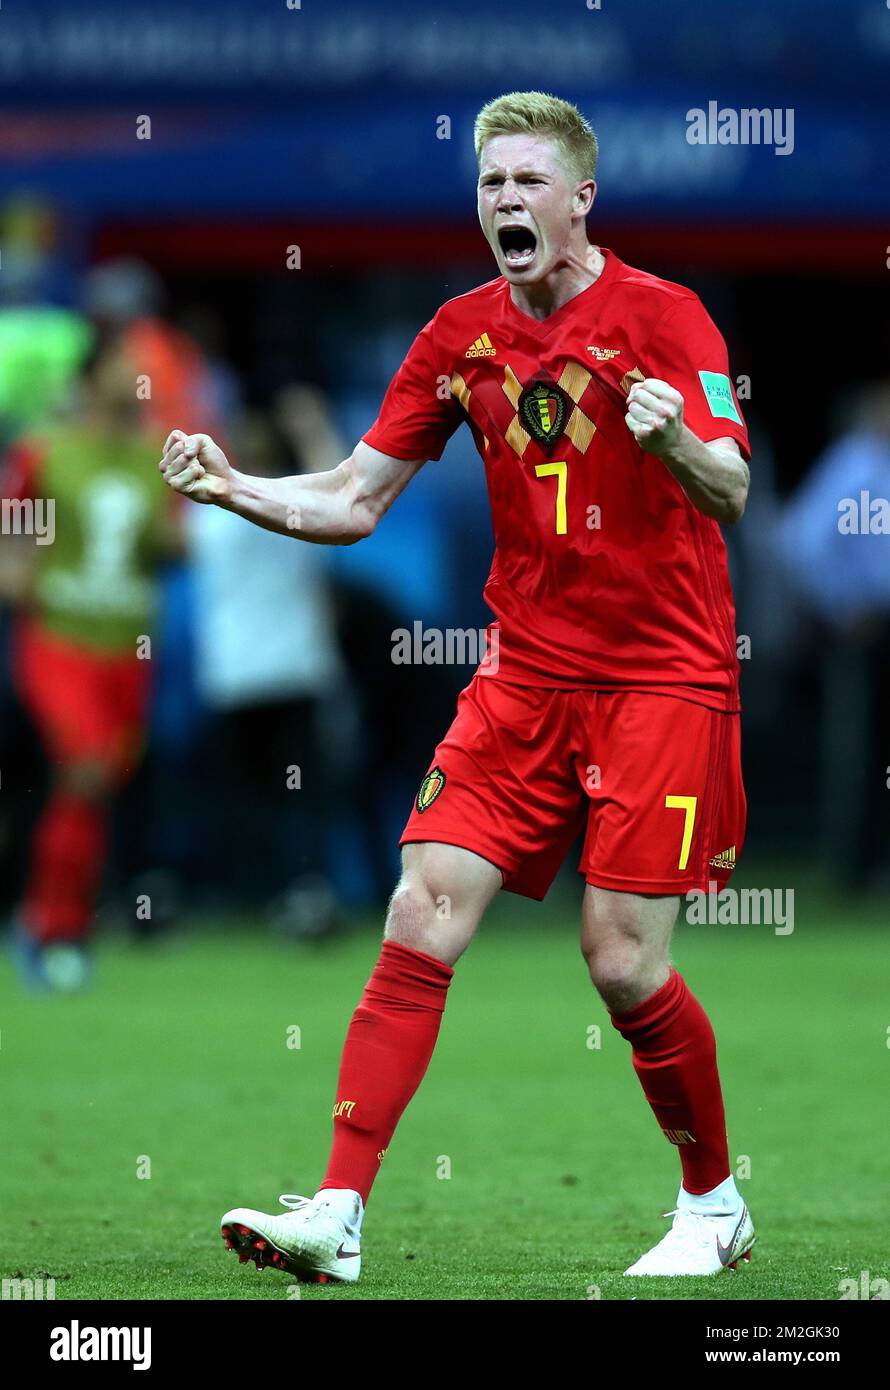 Belgium's Kevin De Bruyne reacts during a soccer game between Belgian national soccer team the Red Devils and Brazil in Kazan, Russia, Friday 06 July 2018, the quarter-finals of the 2018 FIFA World Cup. BELGA PHOTO BRUNO FAHY  Stock Photo